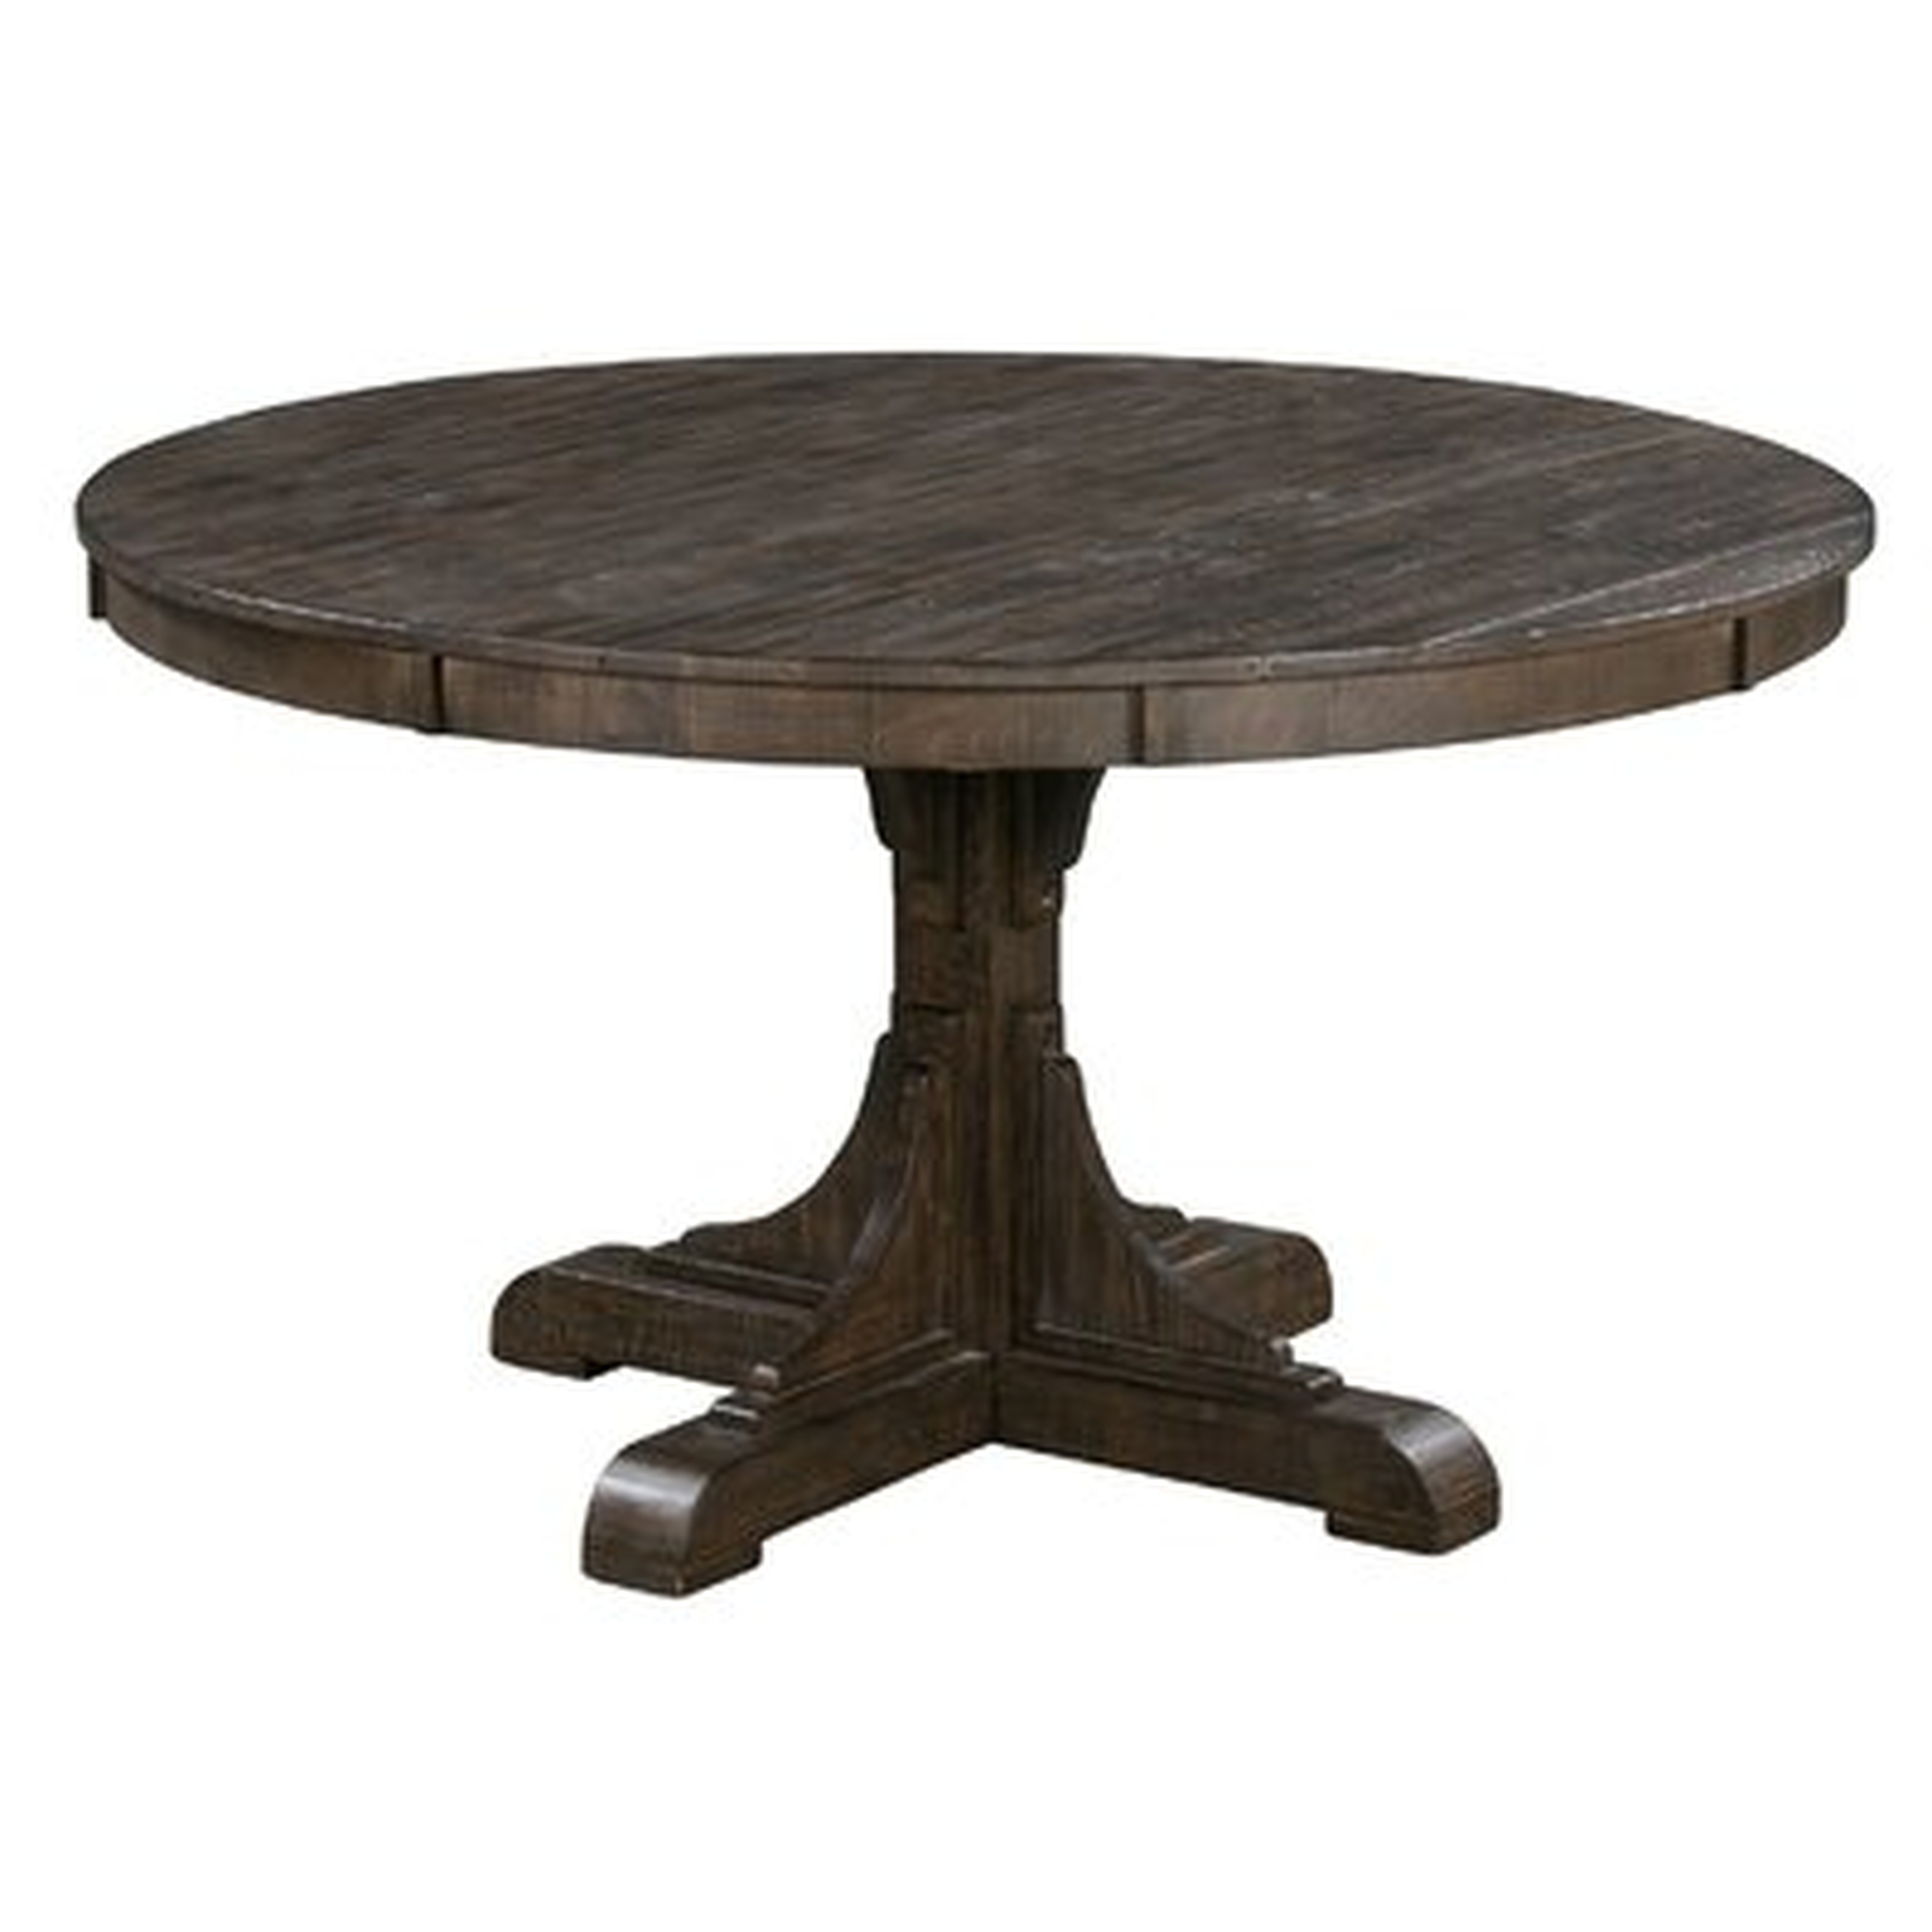 Poar 54" Round Recycled Pine Dining Table - Wayfair